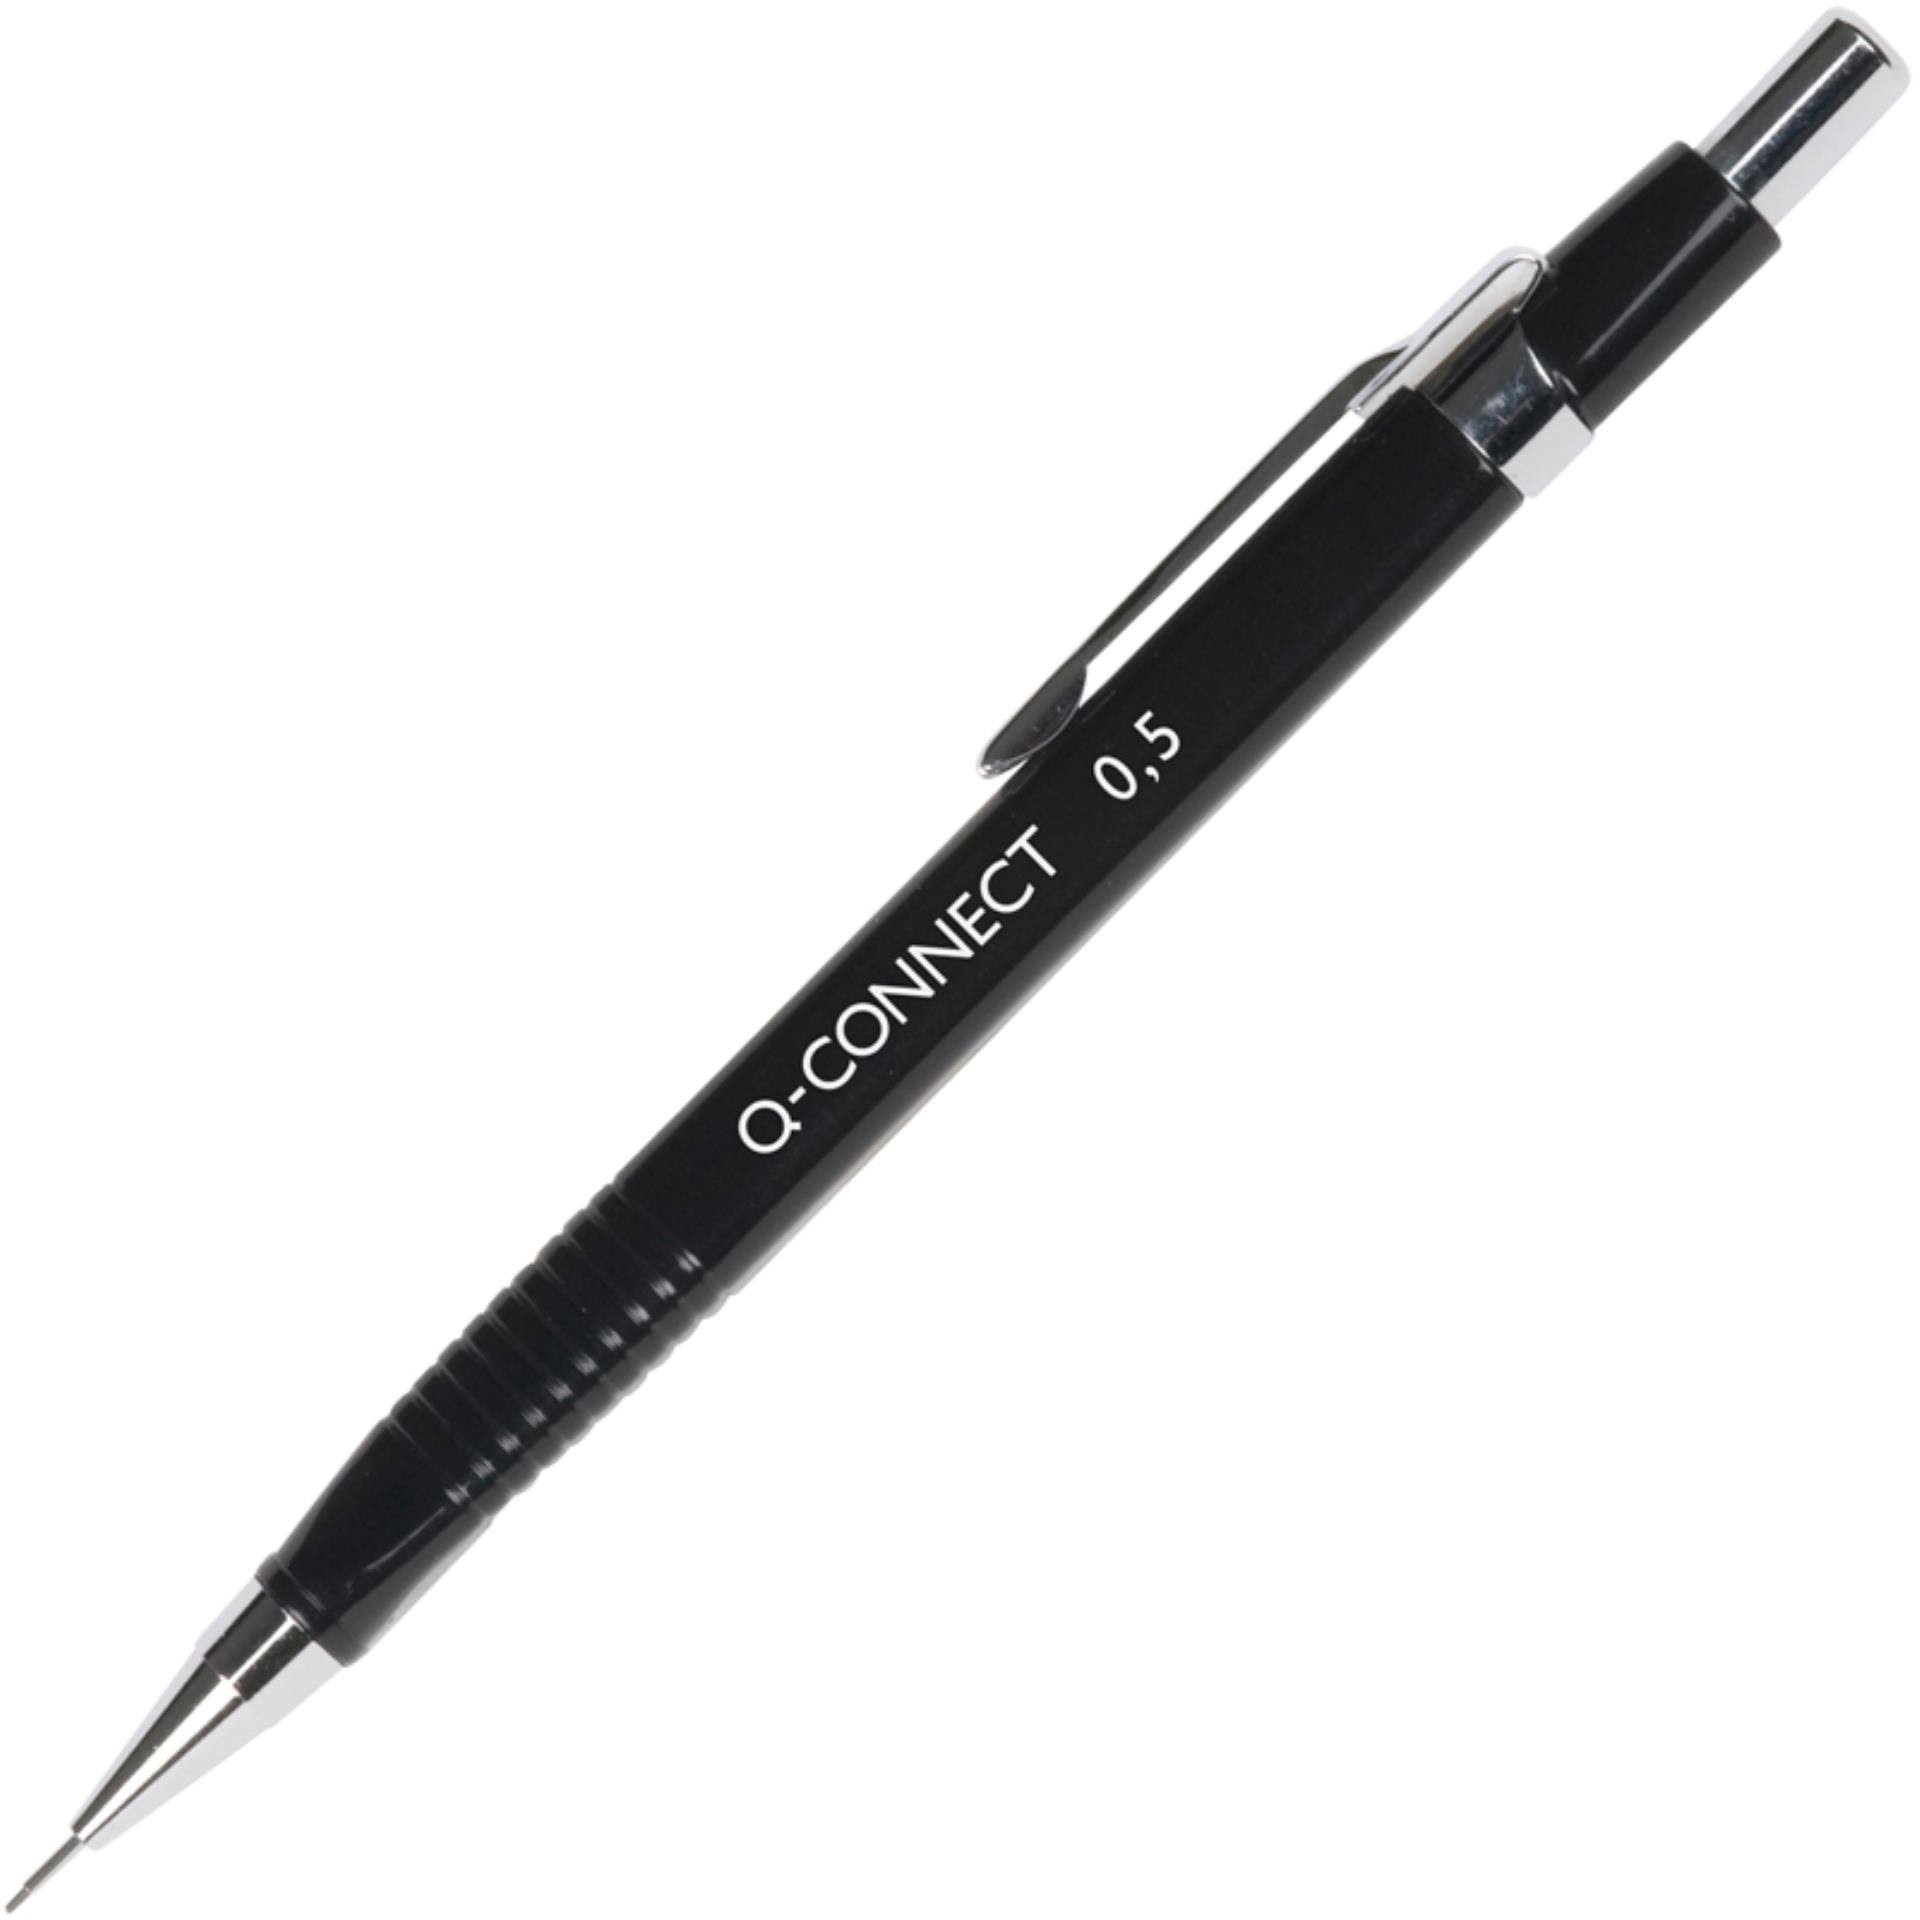 Q Connect Automatic Clutch Pencil with Built-In Eraser and Pocket Clip